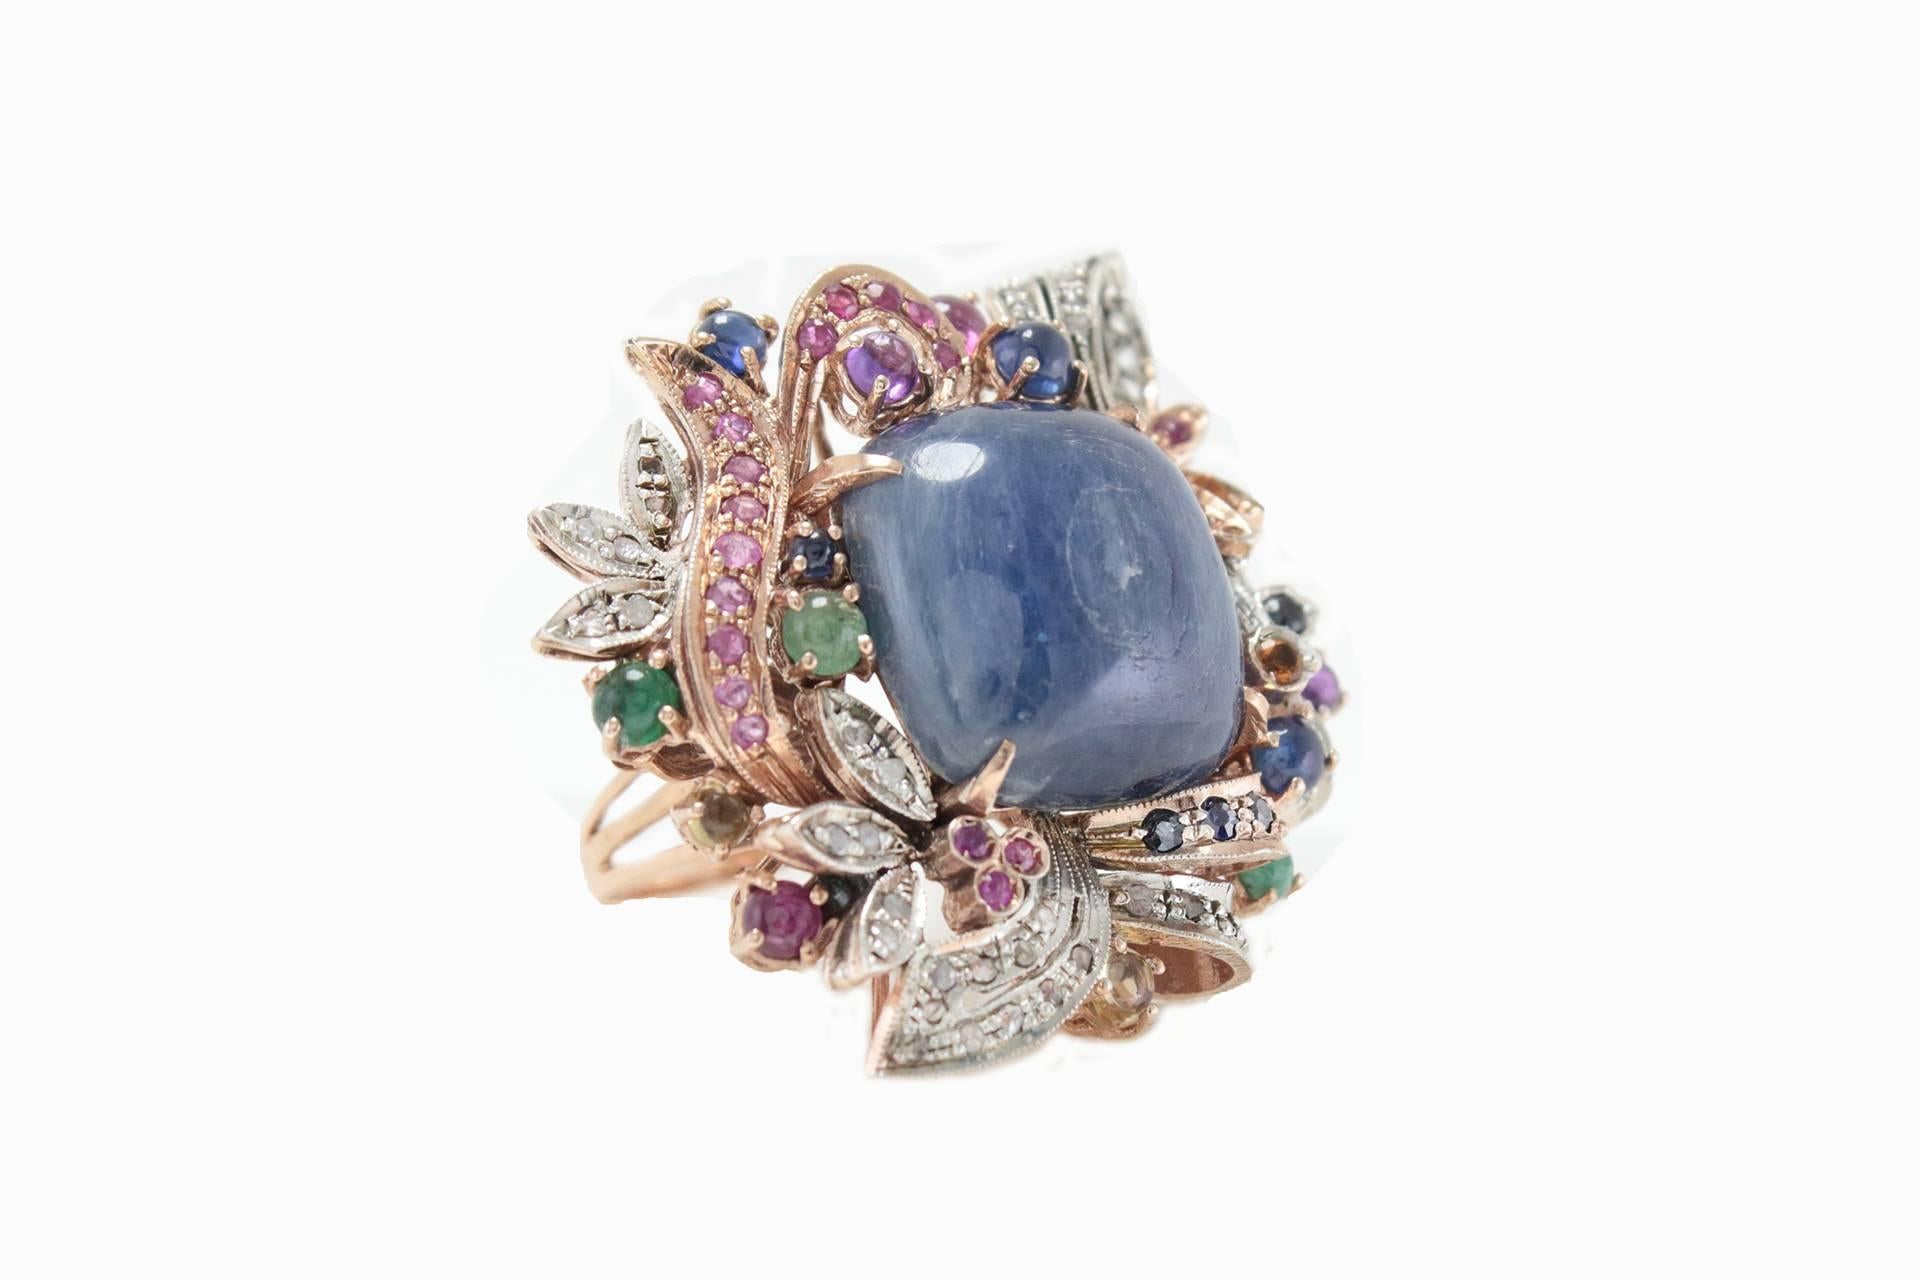 Charming ring in 9Kt gold and silver composed of a central lovely square shaped Cianite or Kyanite surrounde by diamonds, multistone sapphire, emerald and rubies.

multistone sapphire, emerald and rubies(tot weight 3.90Kt), s
Cianite or Kyanite